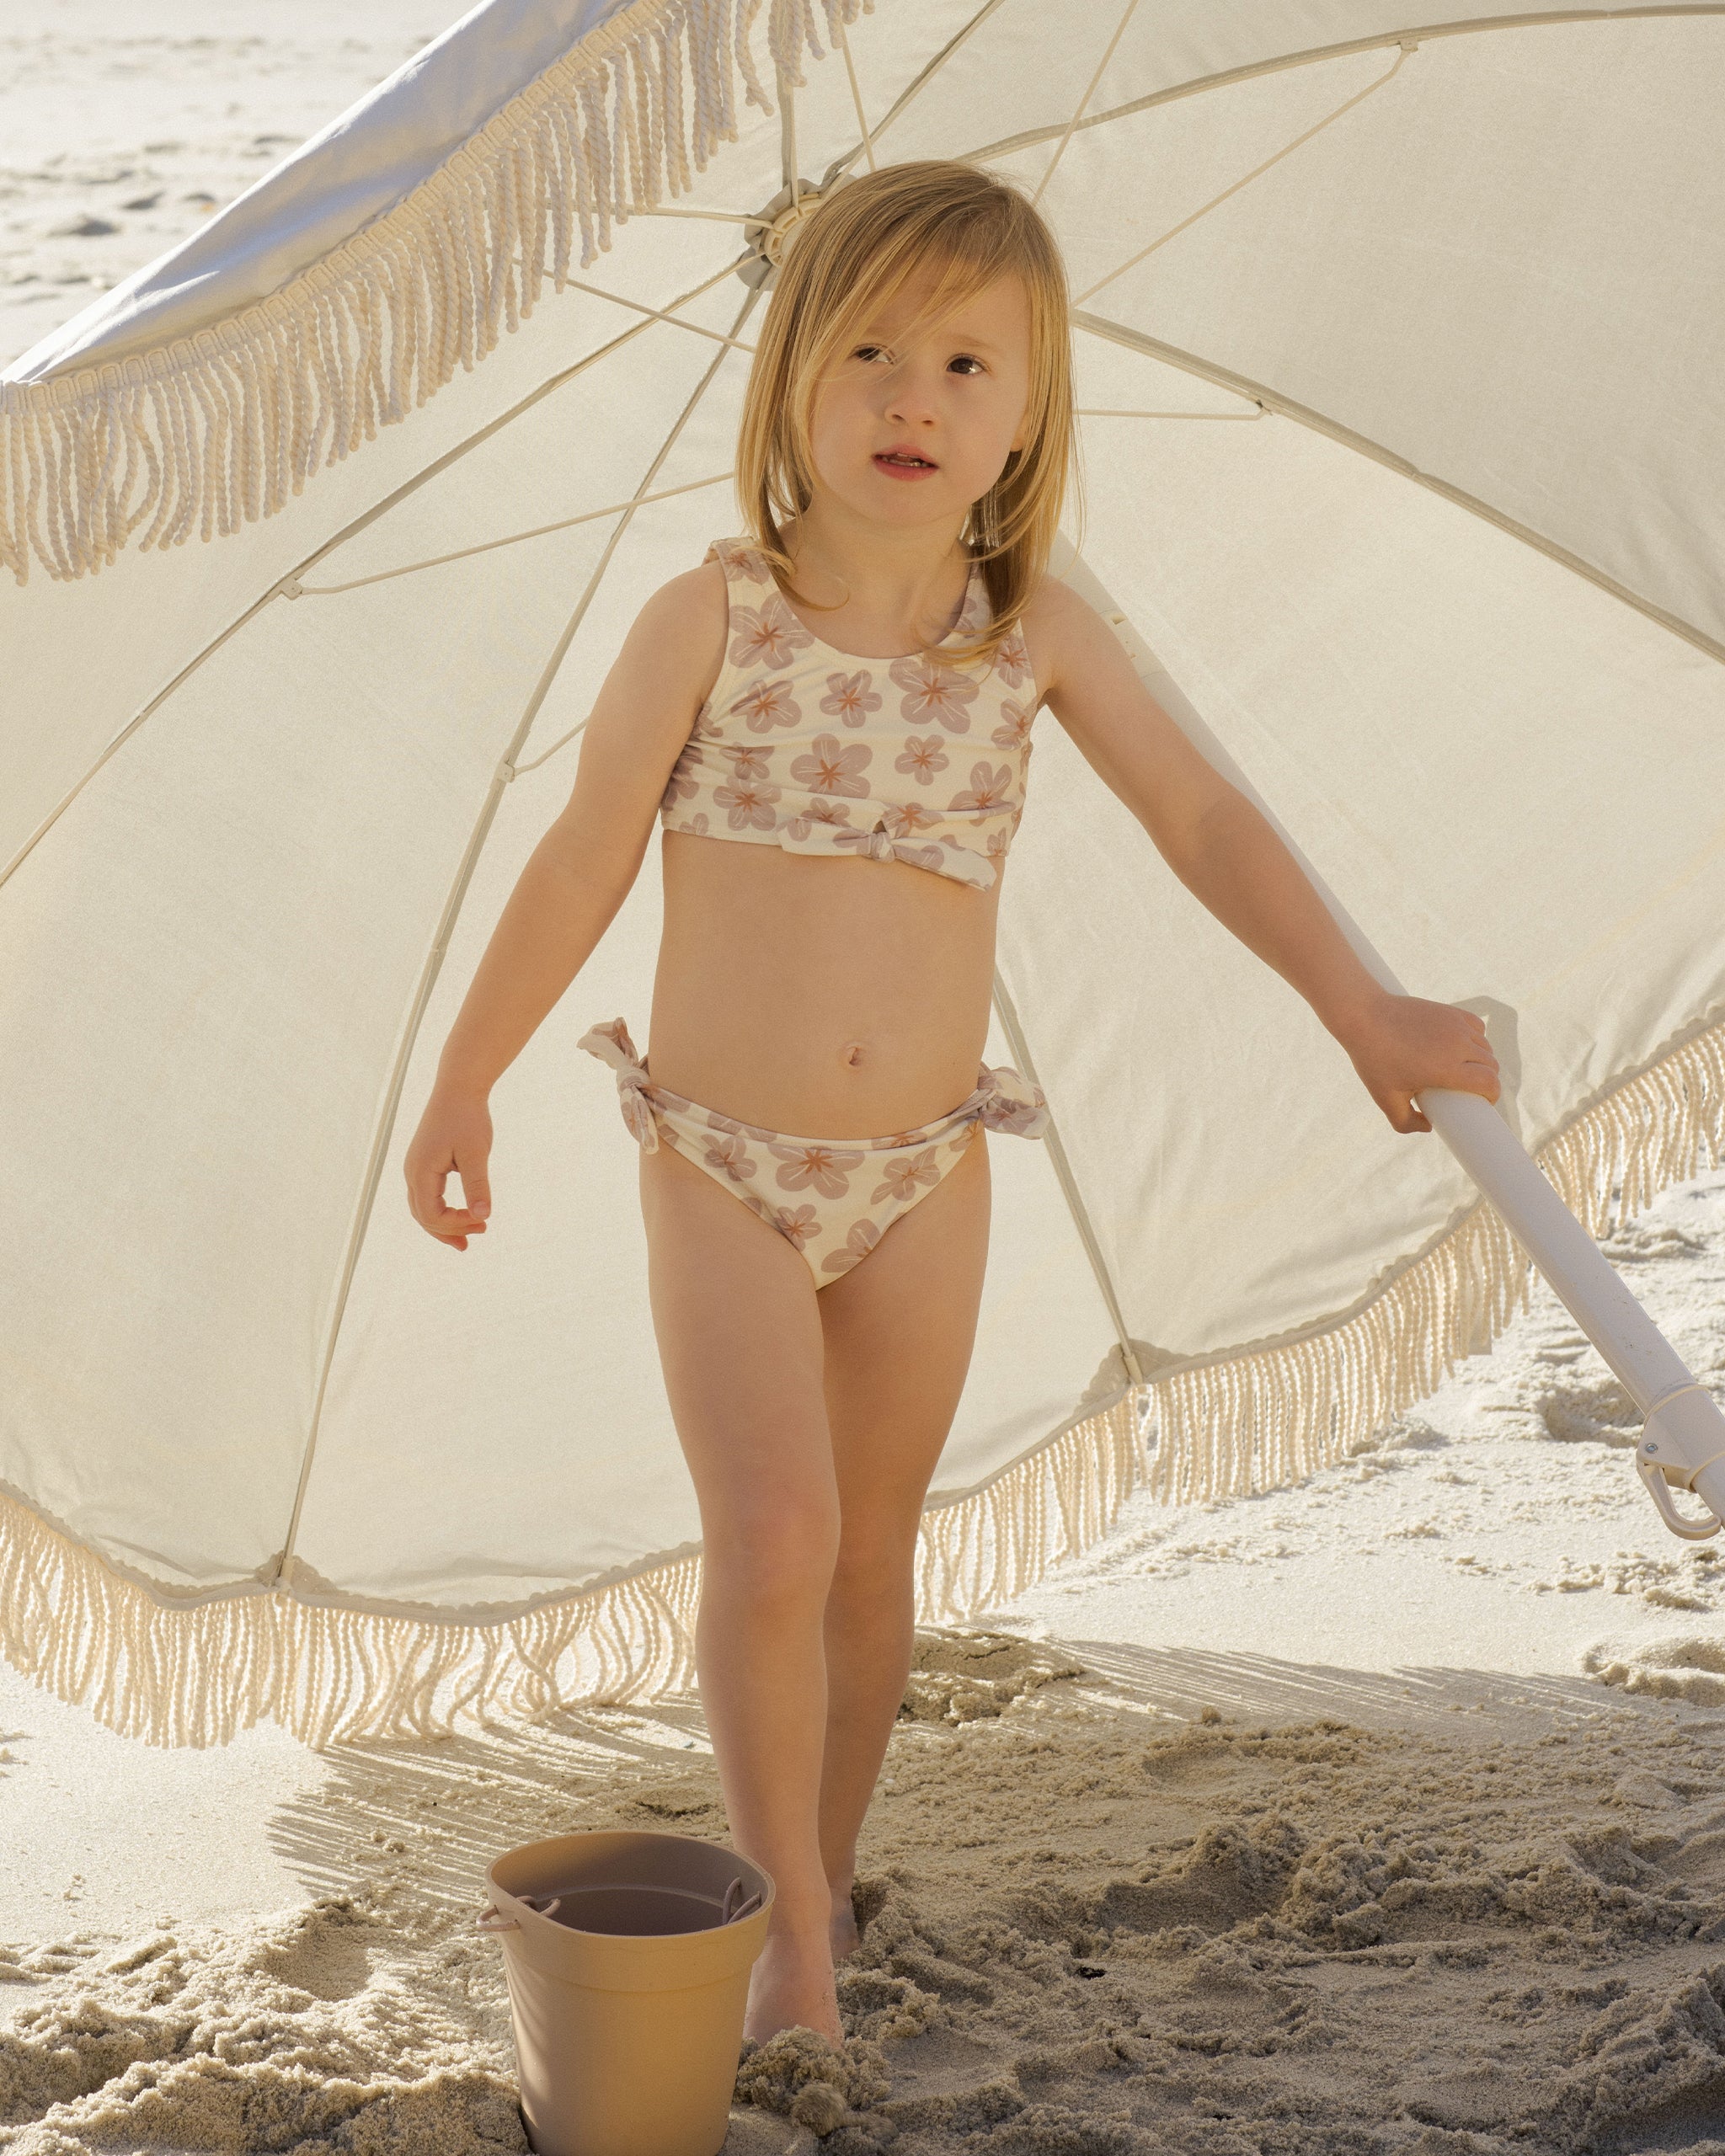 Knotted Bikini || Hibiscus - Rylee + Cru | Kids Clothes | Trendy Baby Clothes | Modern Infant Outfits |